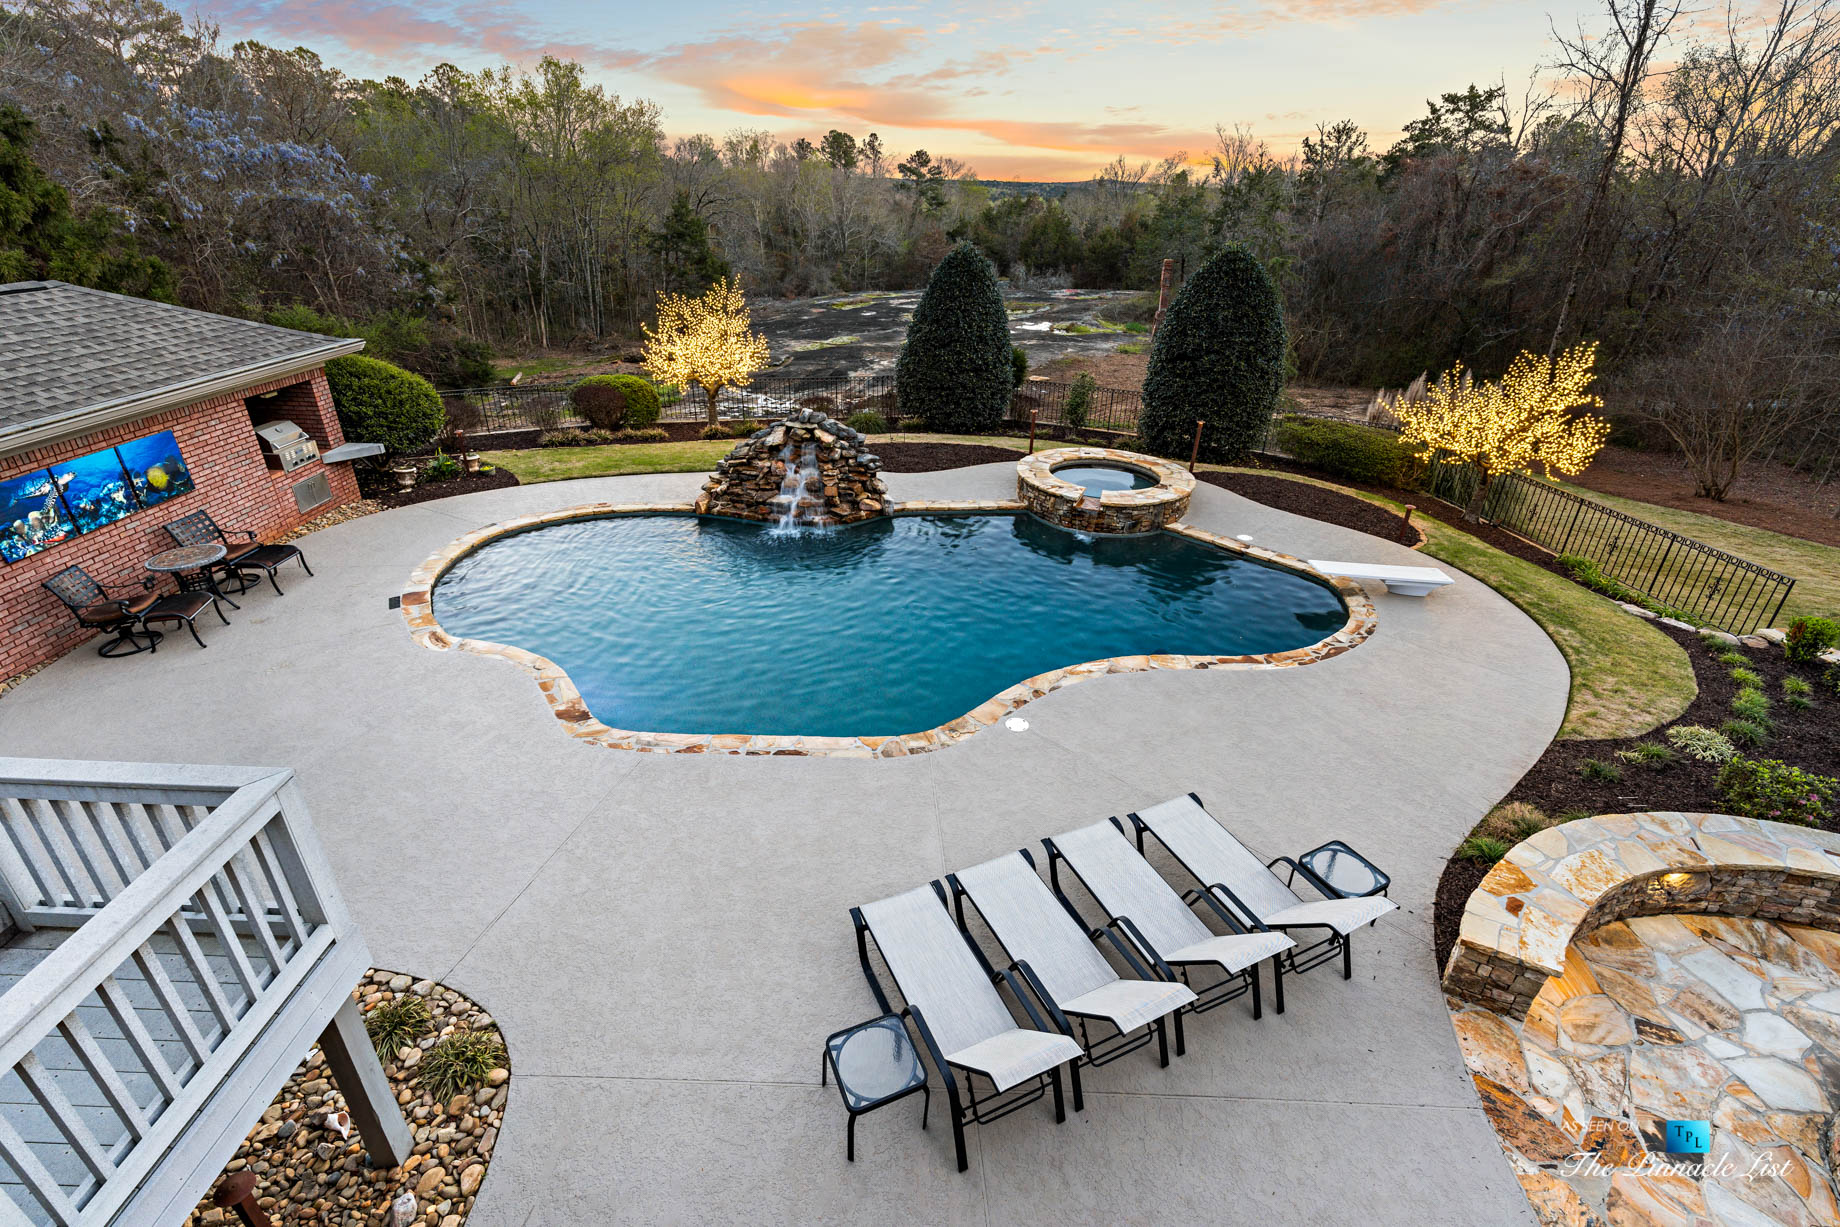 2219 Costley Mill Rd NE, Conyers, GA, USA - Rear Upper Deck Overlooking Pool - Luxury Real Estate - Equestrian Country Home